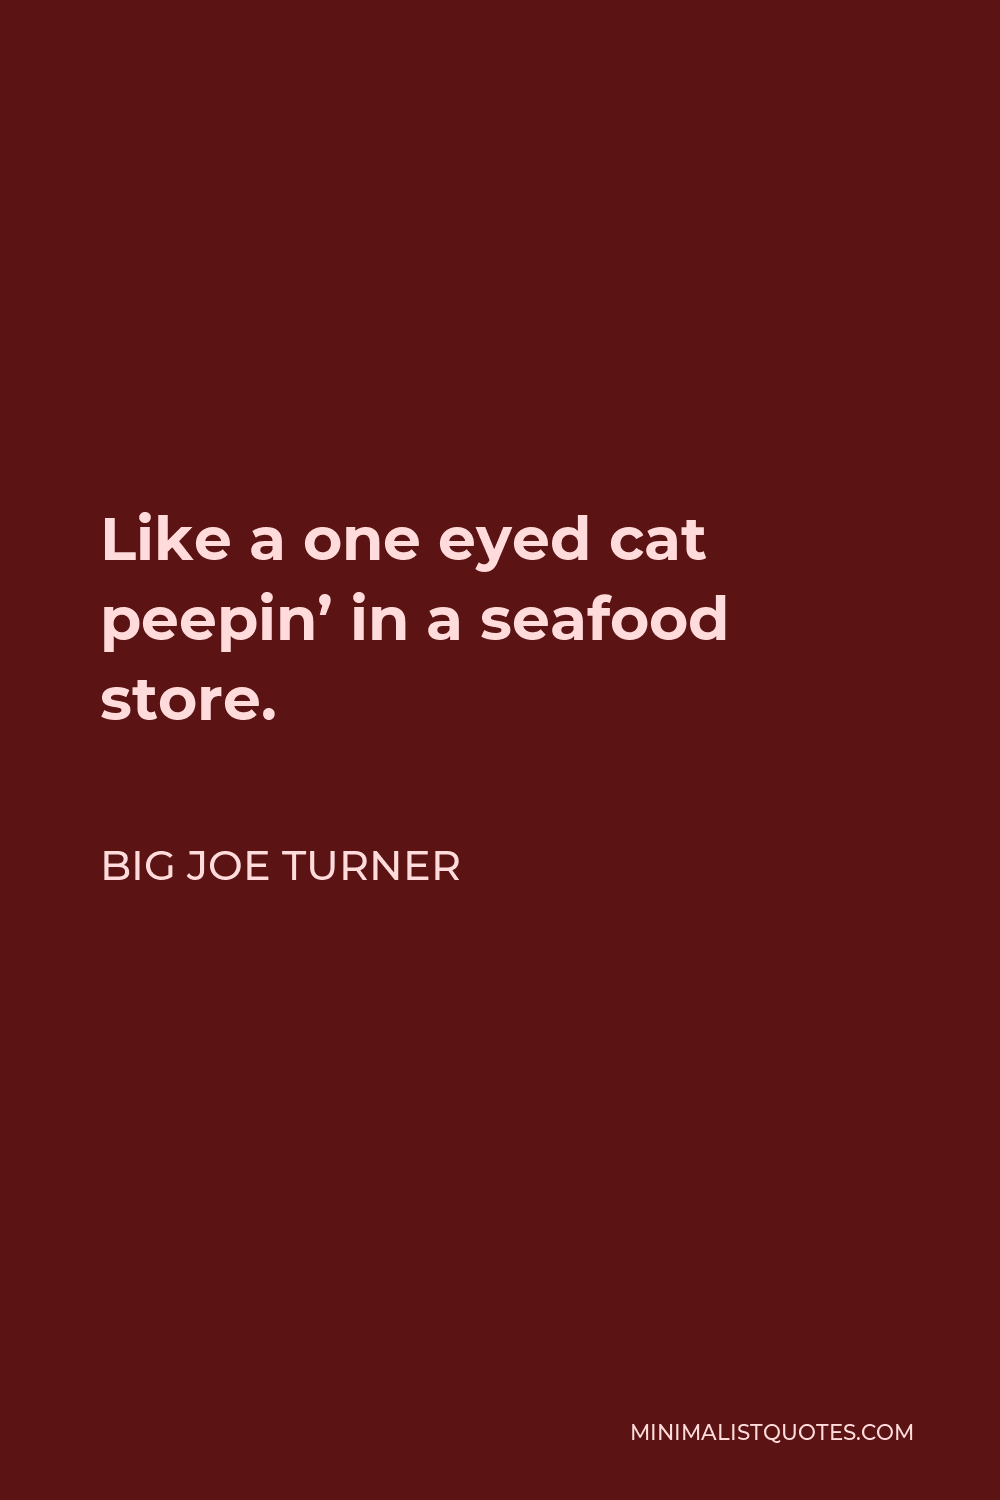 Big Joe Turner Quote - Like a one eyed cat peepin’ in a seafood store.